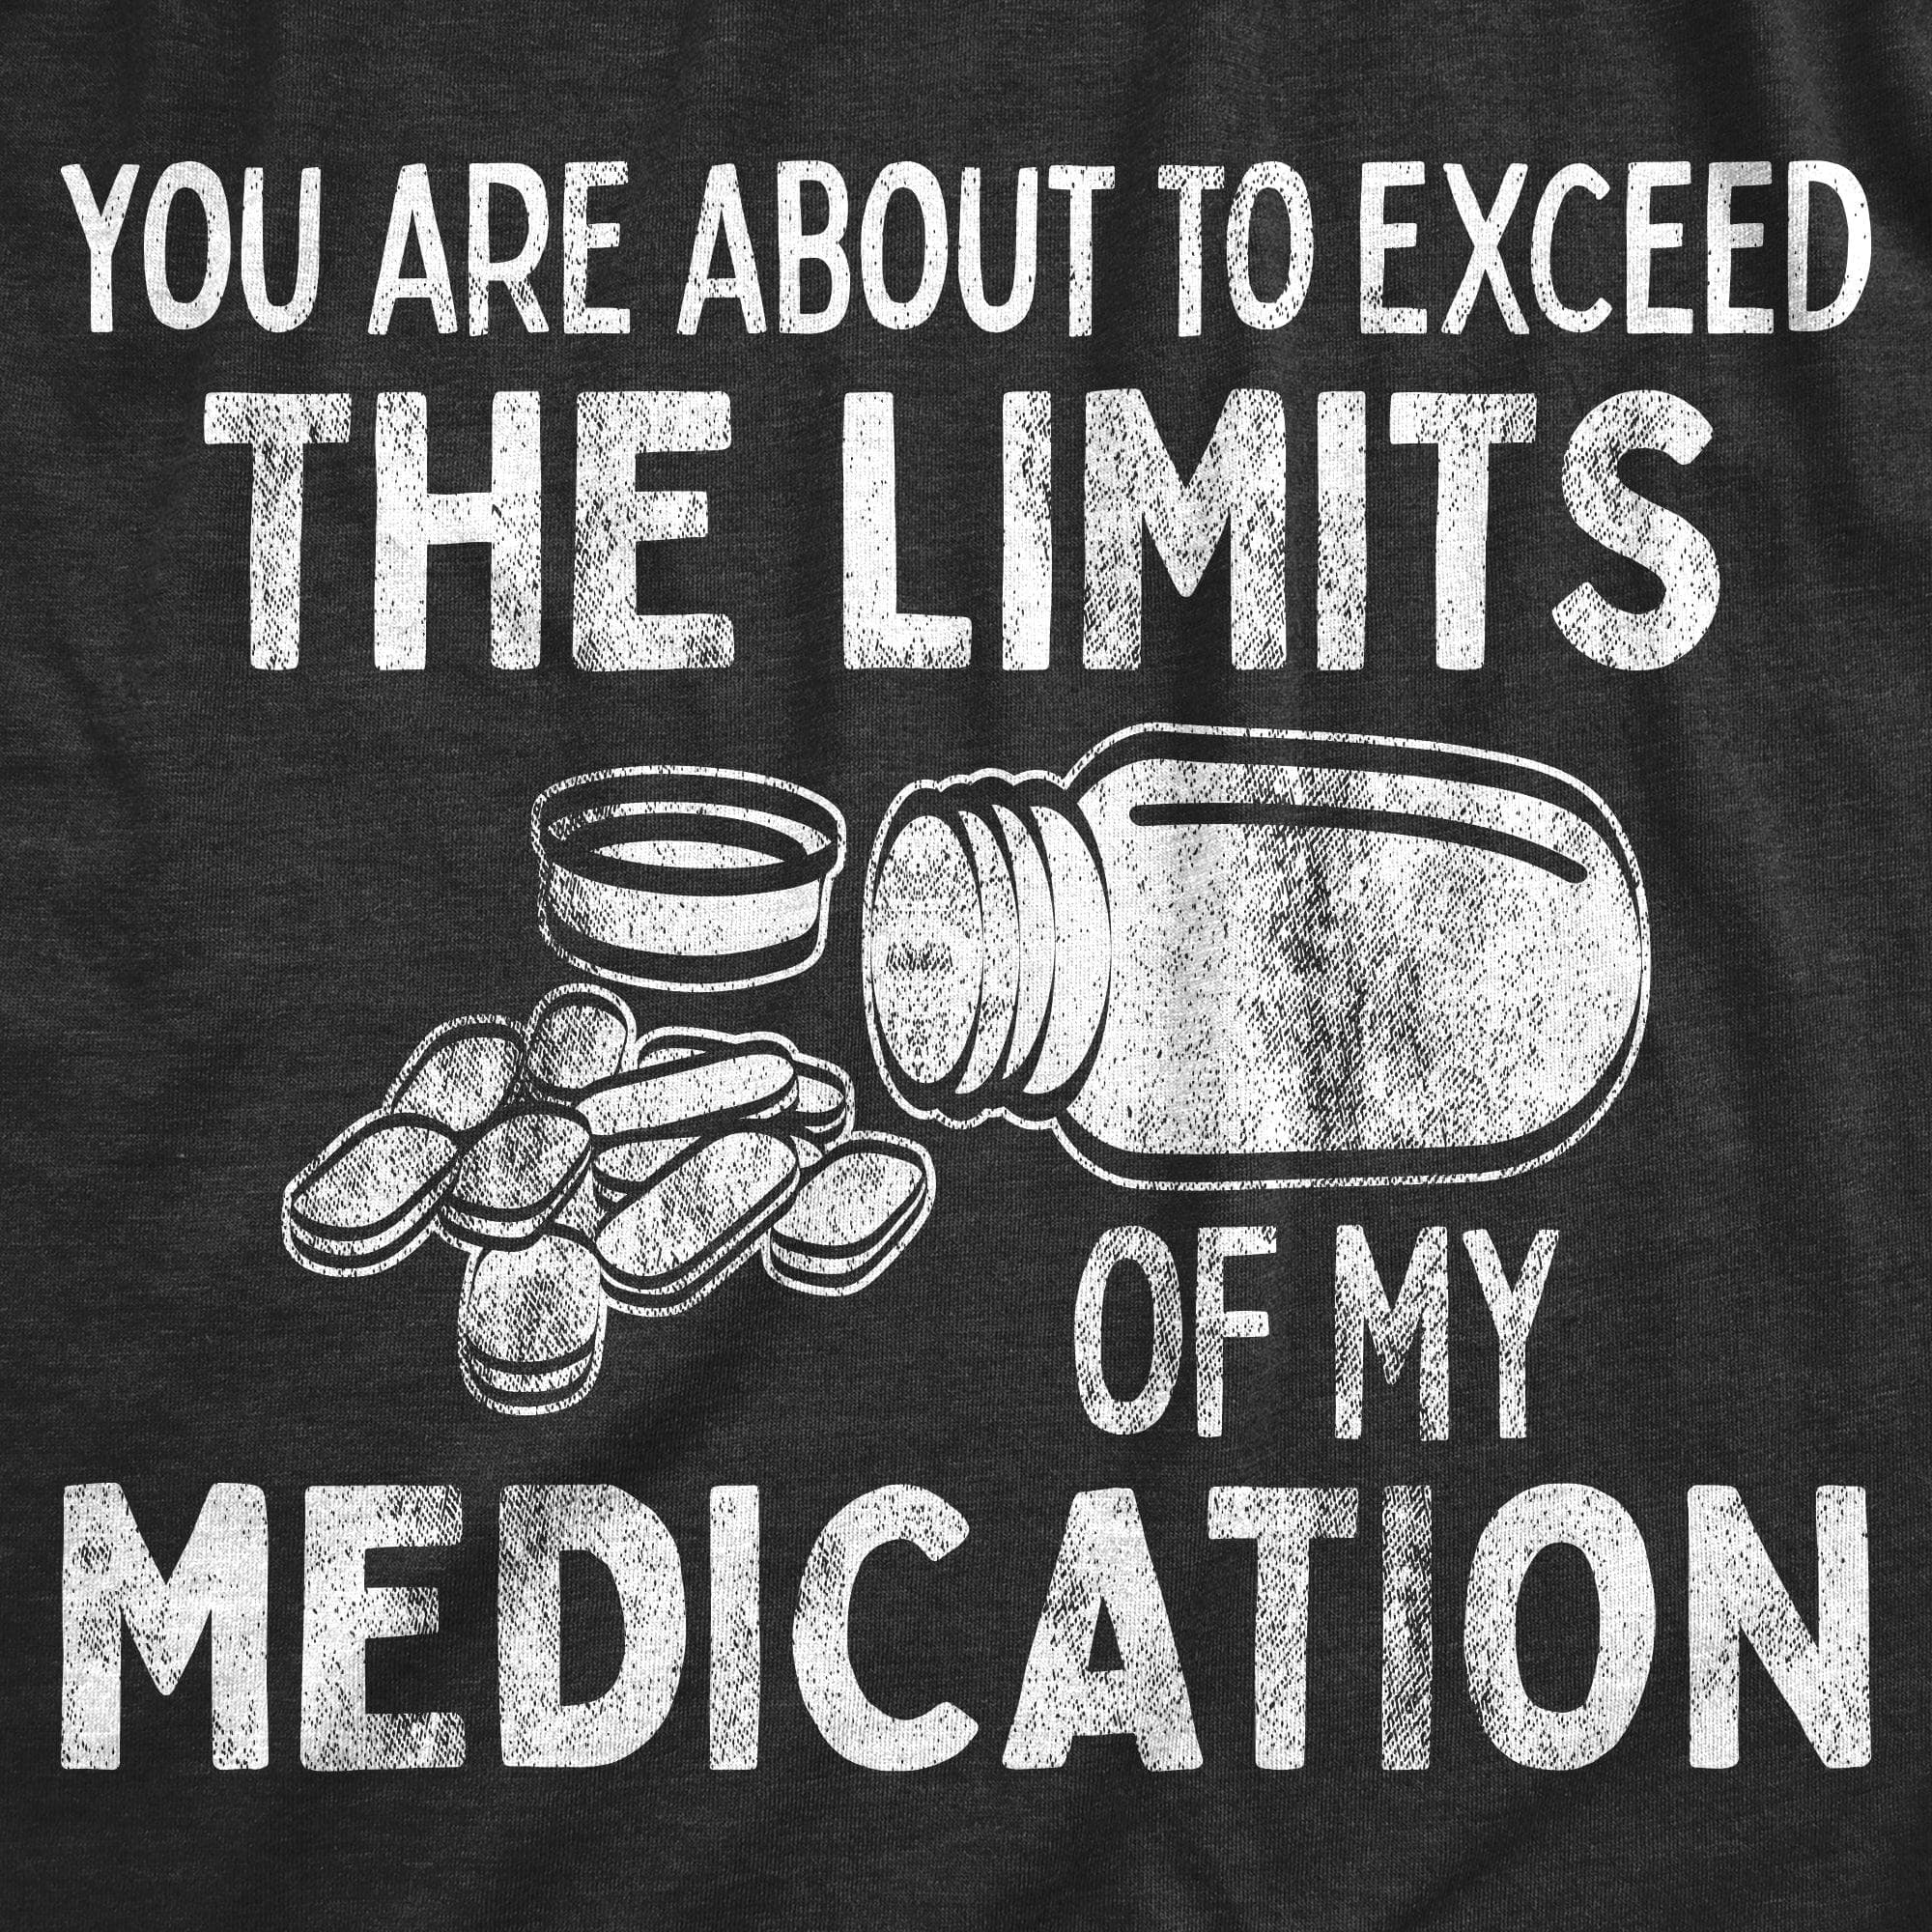 You Are About To Exceed The Limits Of My Medication Women's Tshirt  -  Crazy Dog T-Shirts